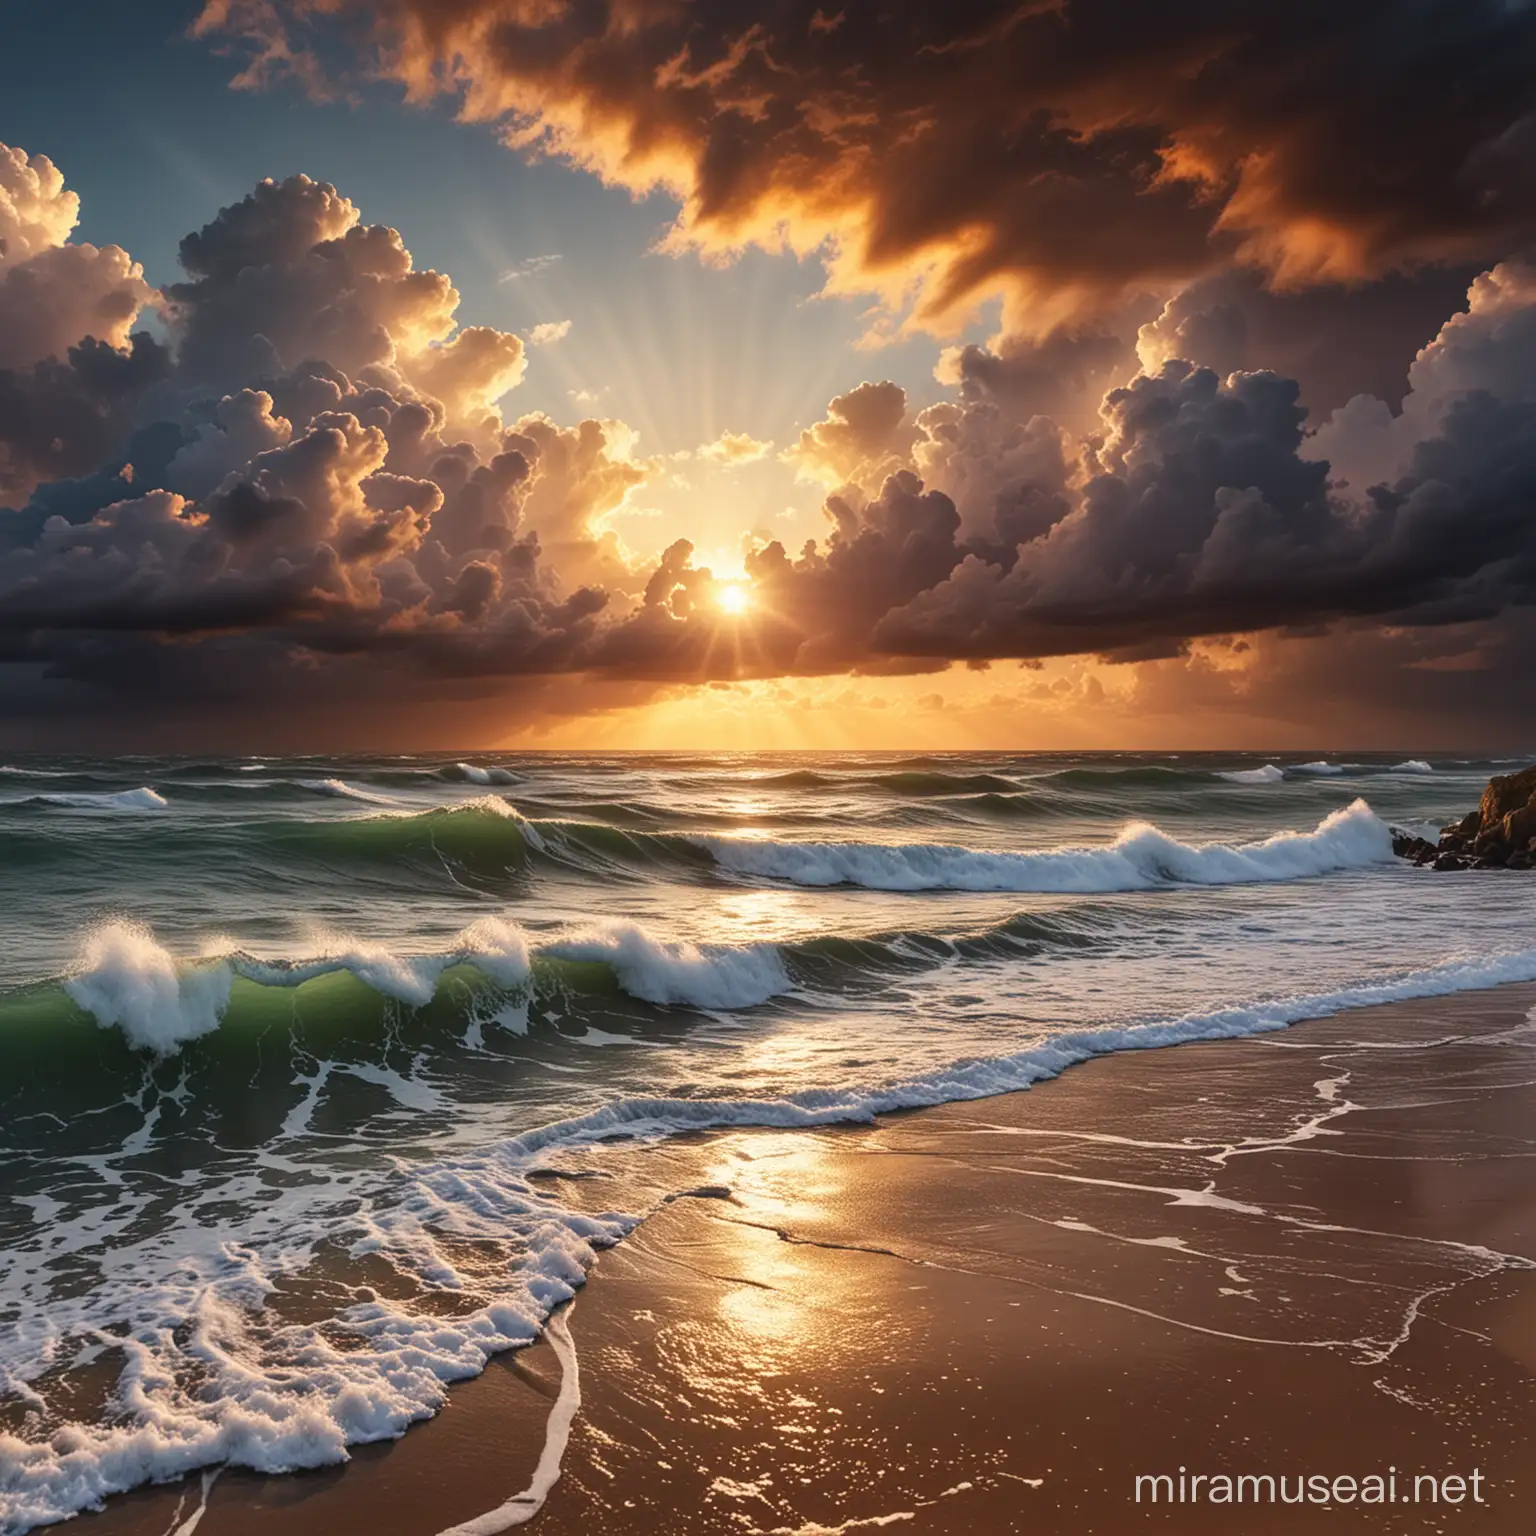 Dramatic Sunset over Ocean Waves with Storm Clouds and Light Path